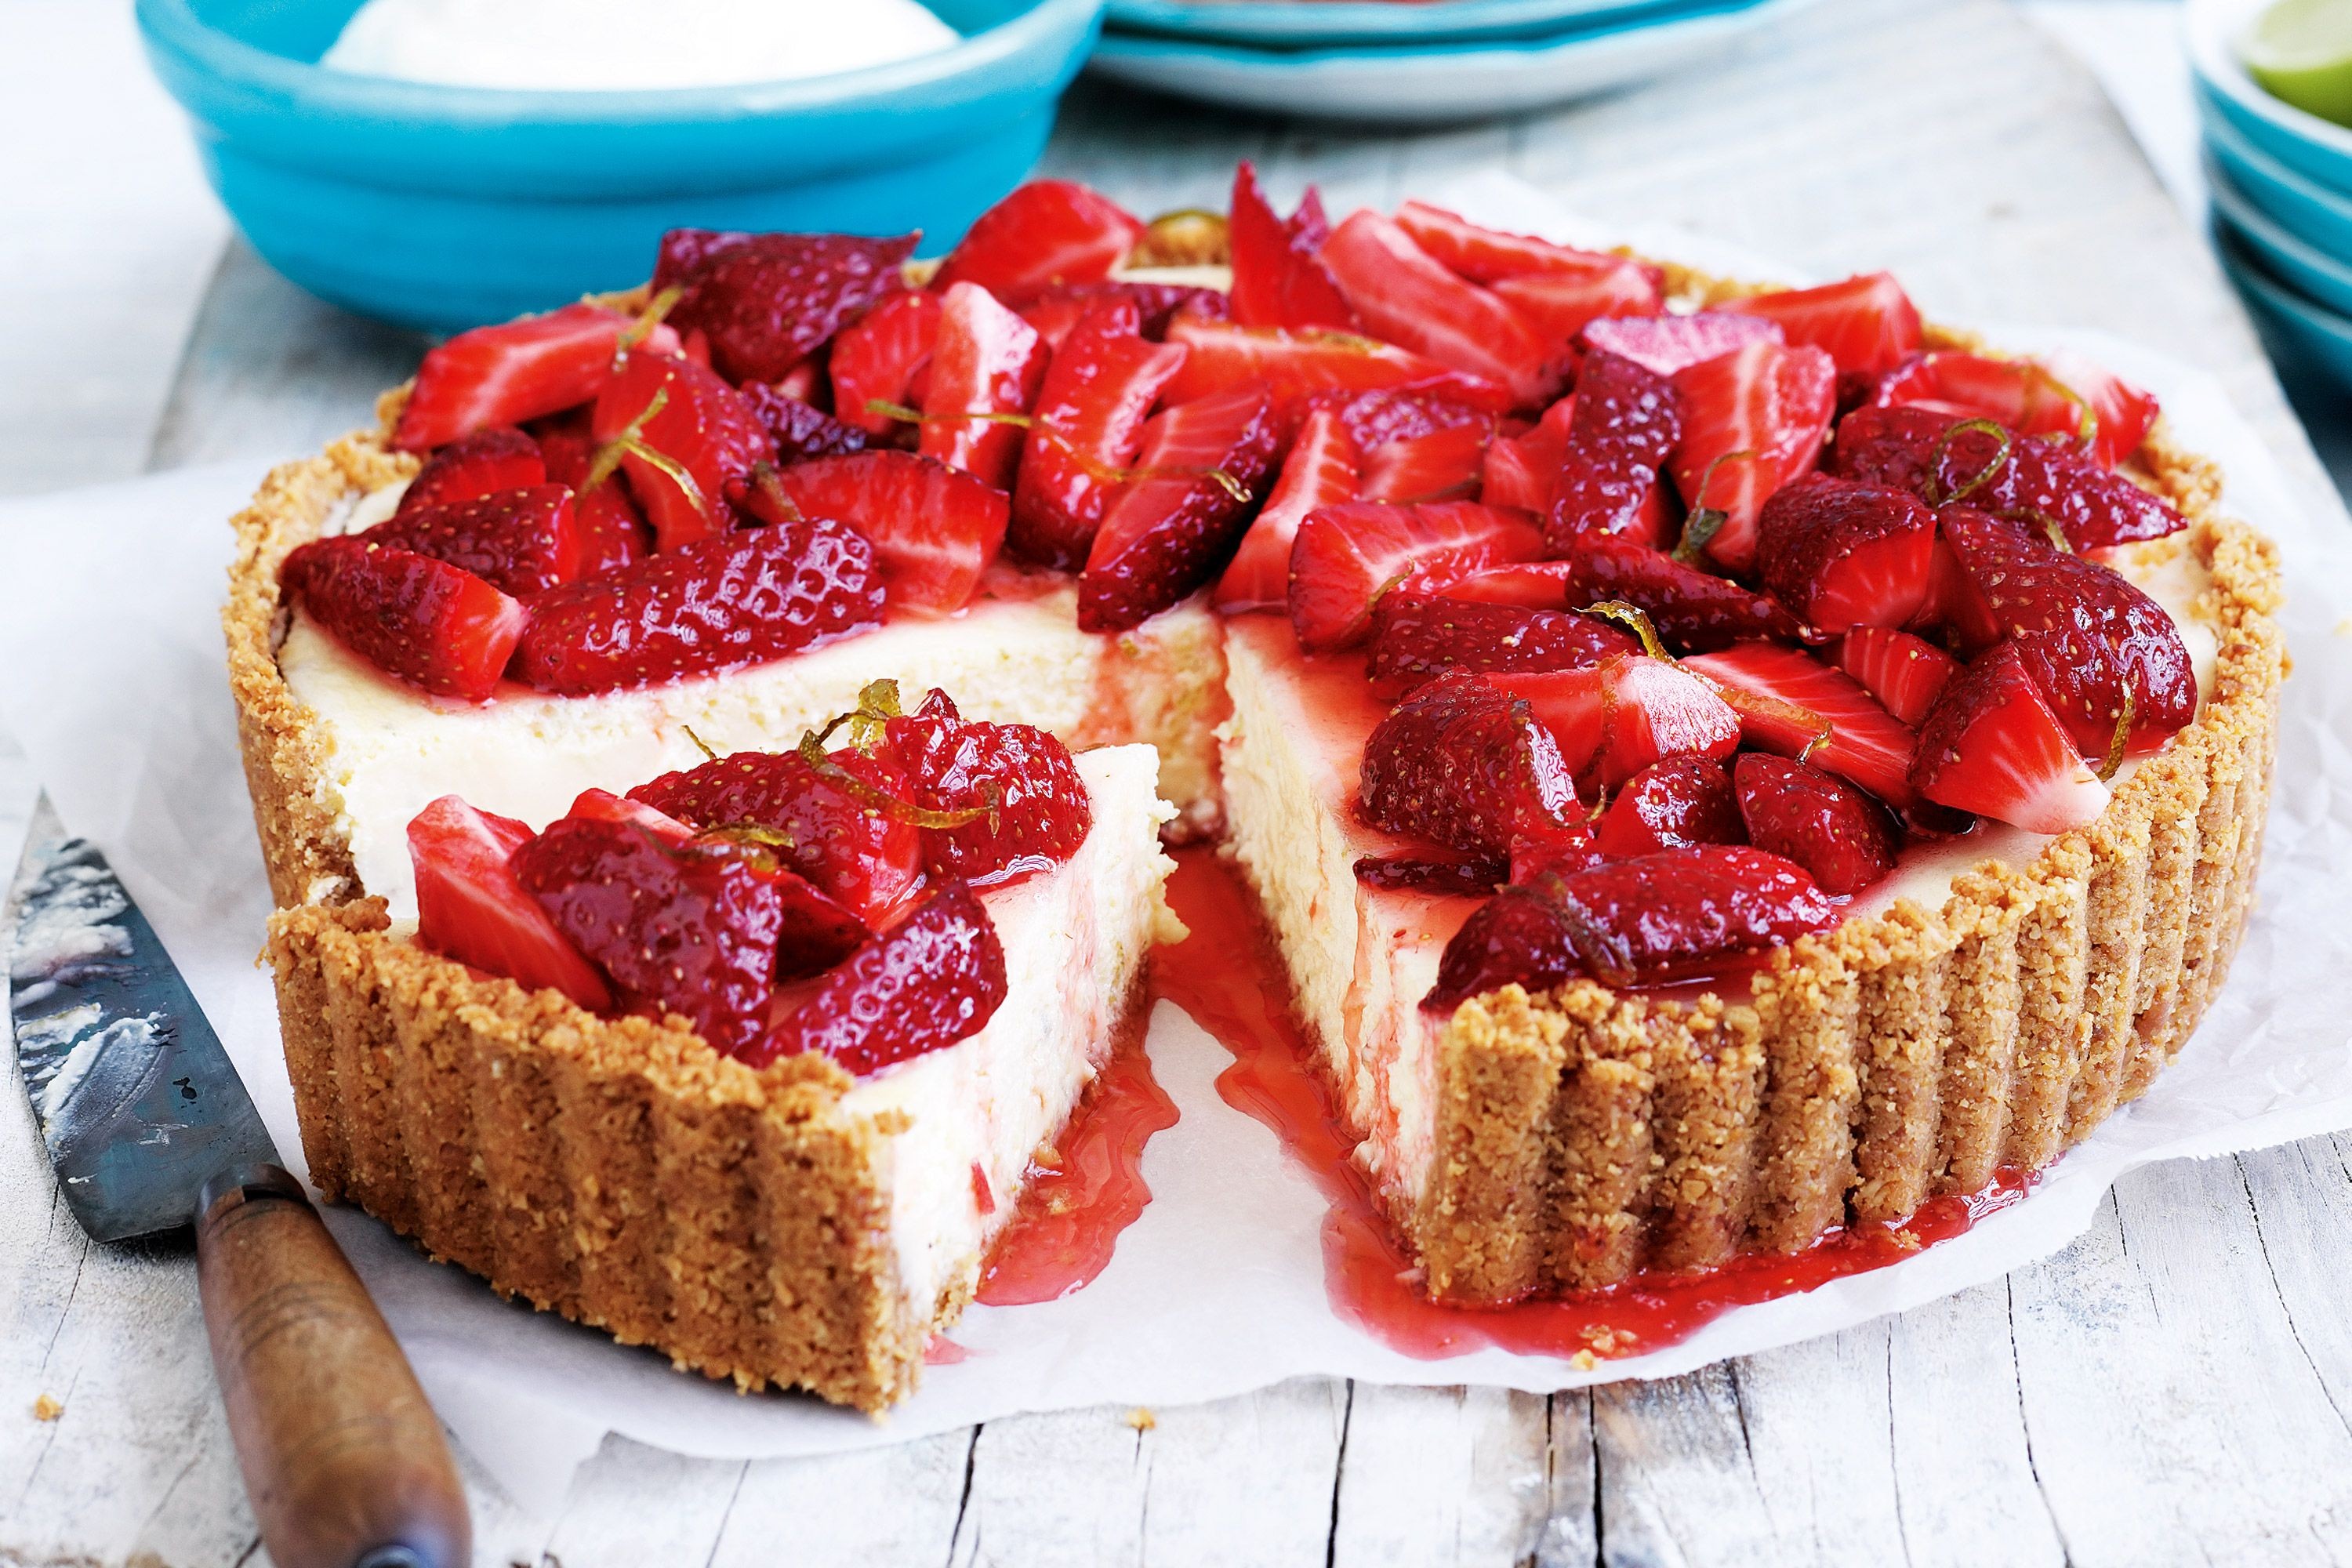 Key lime pie with strawberries